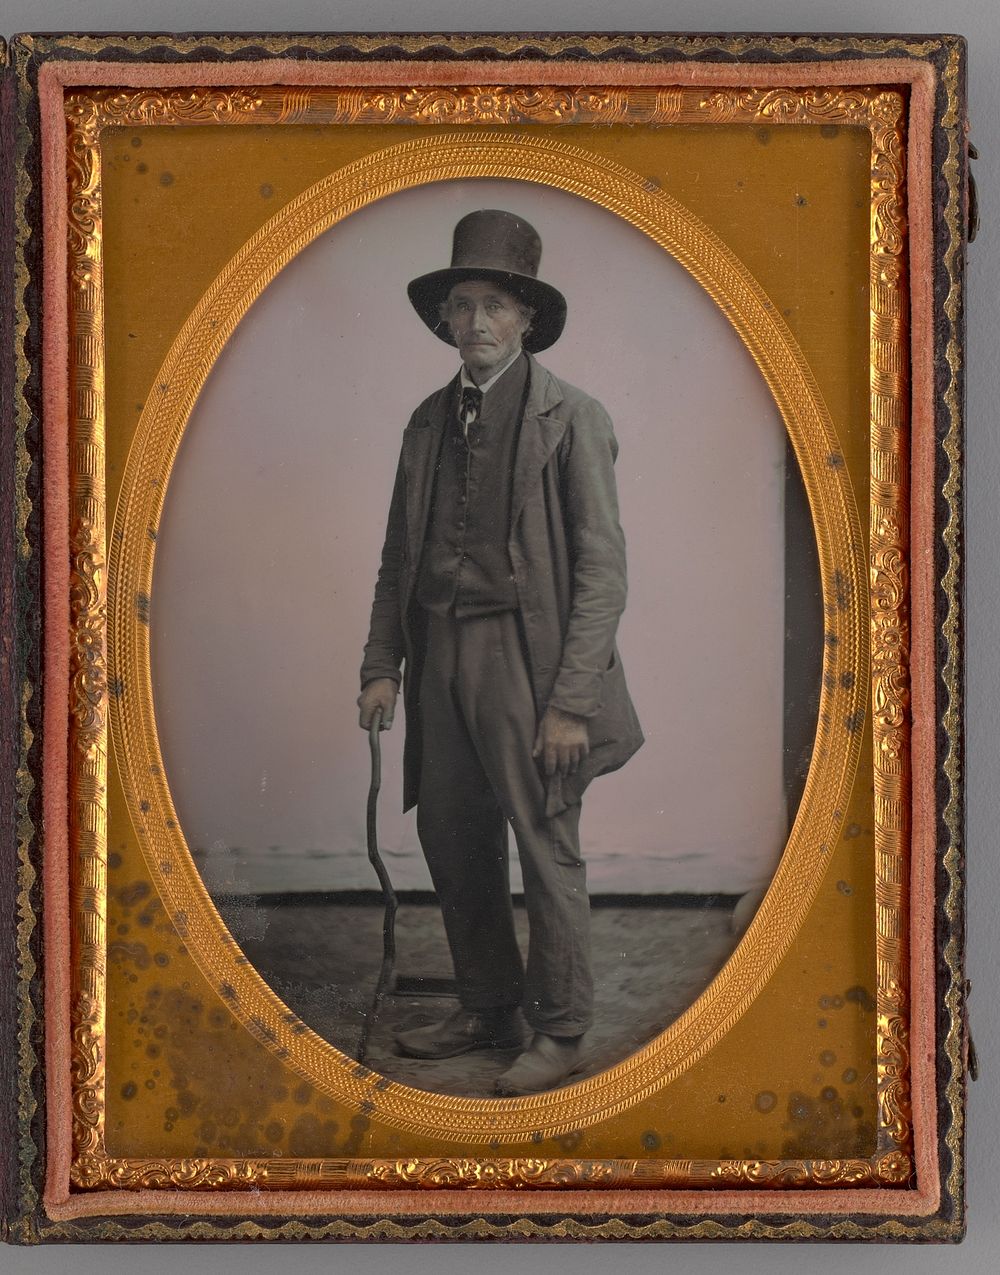 Untitled (Portrait of a Standing Man with Top Hat) by Unknown Maker